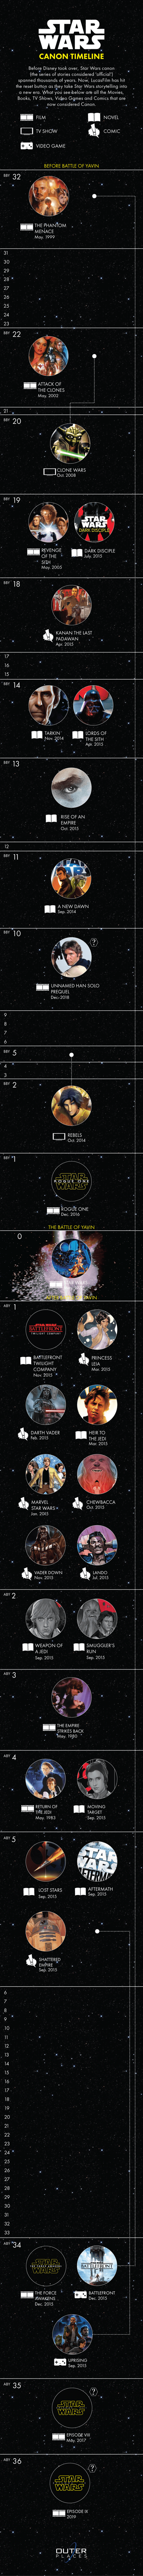 star-wars-timeline-infographic-for-the-new-canon